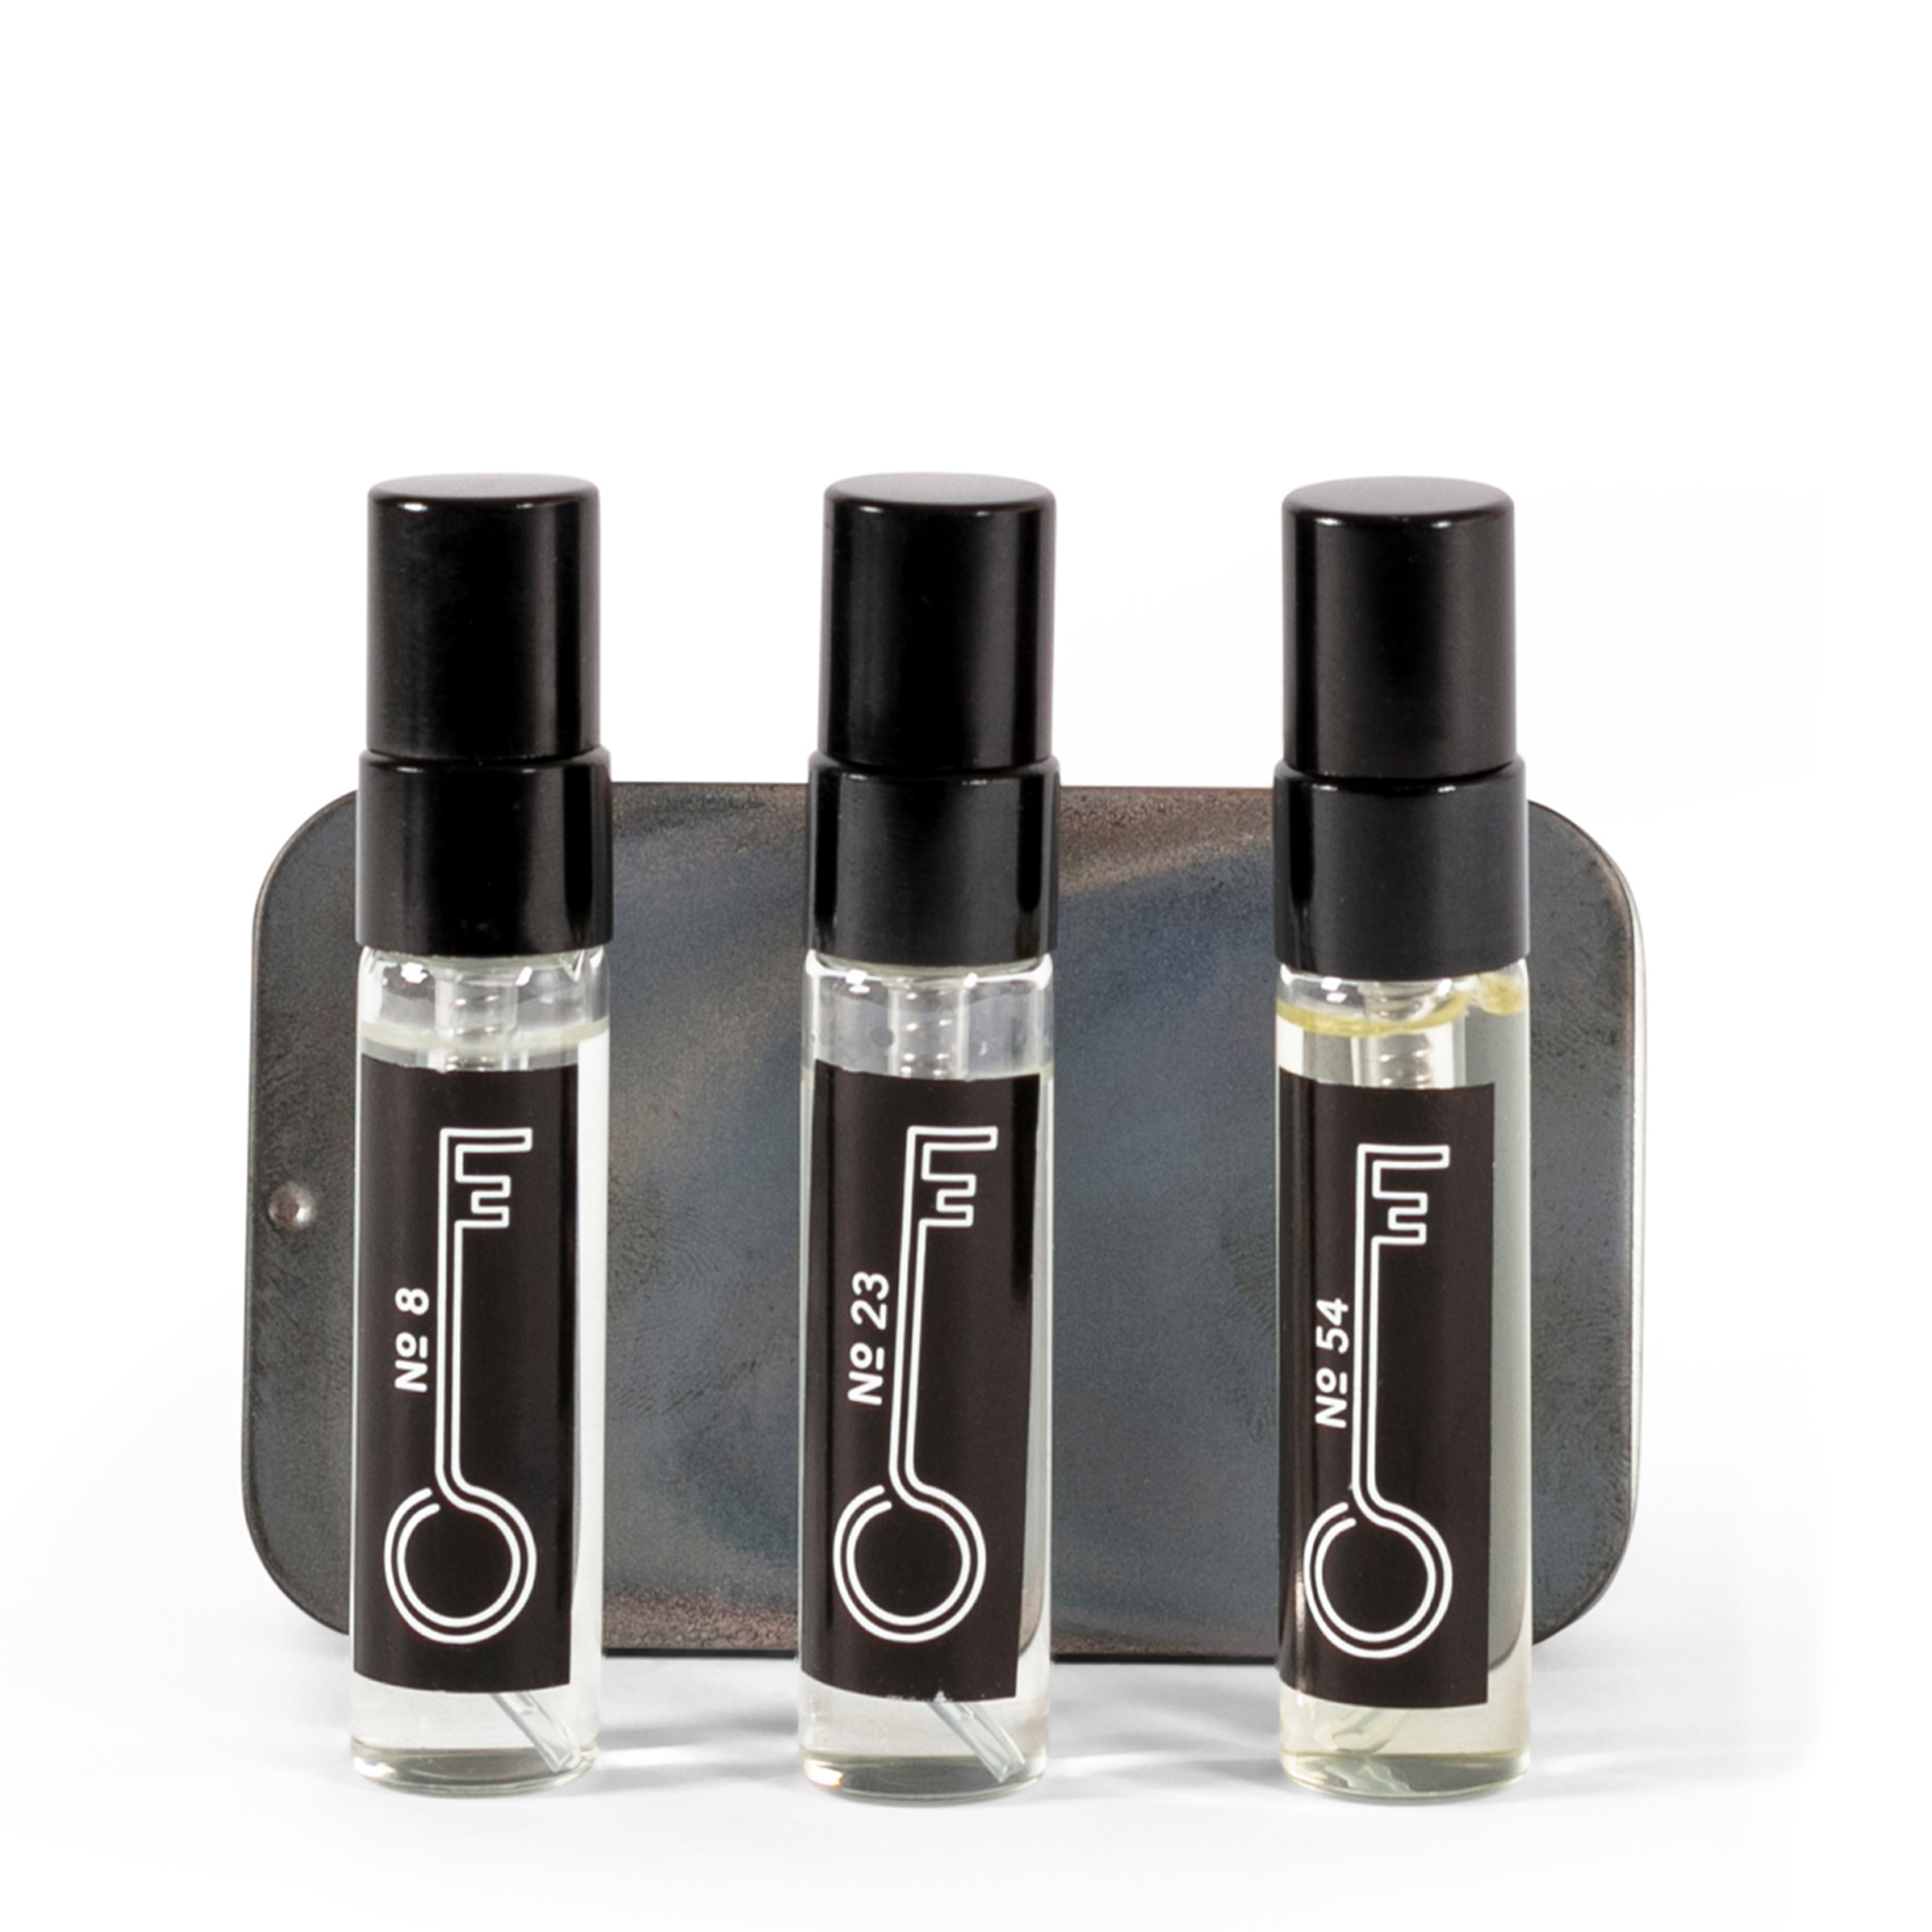 The Fragrance Set includes 5ml bottles of three signature fragrances: No. 8, No. 23, and No. 54.